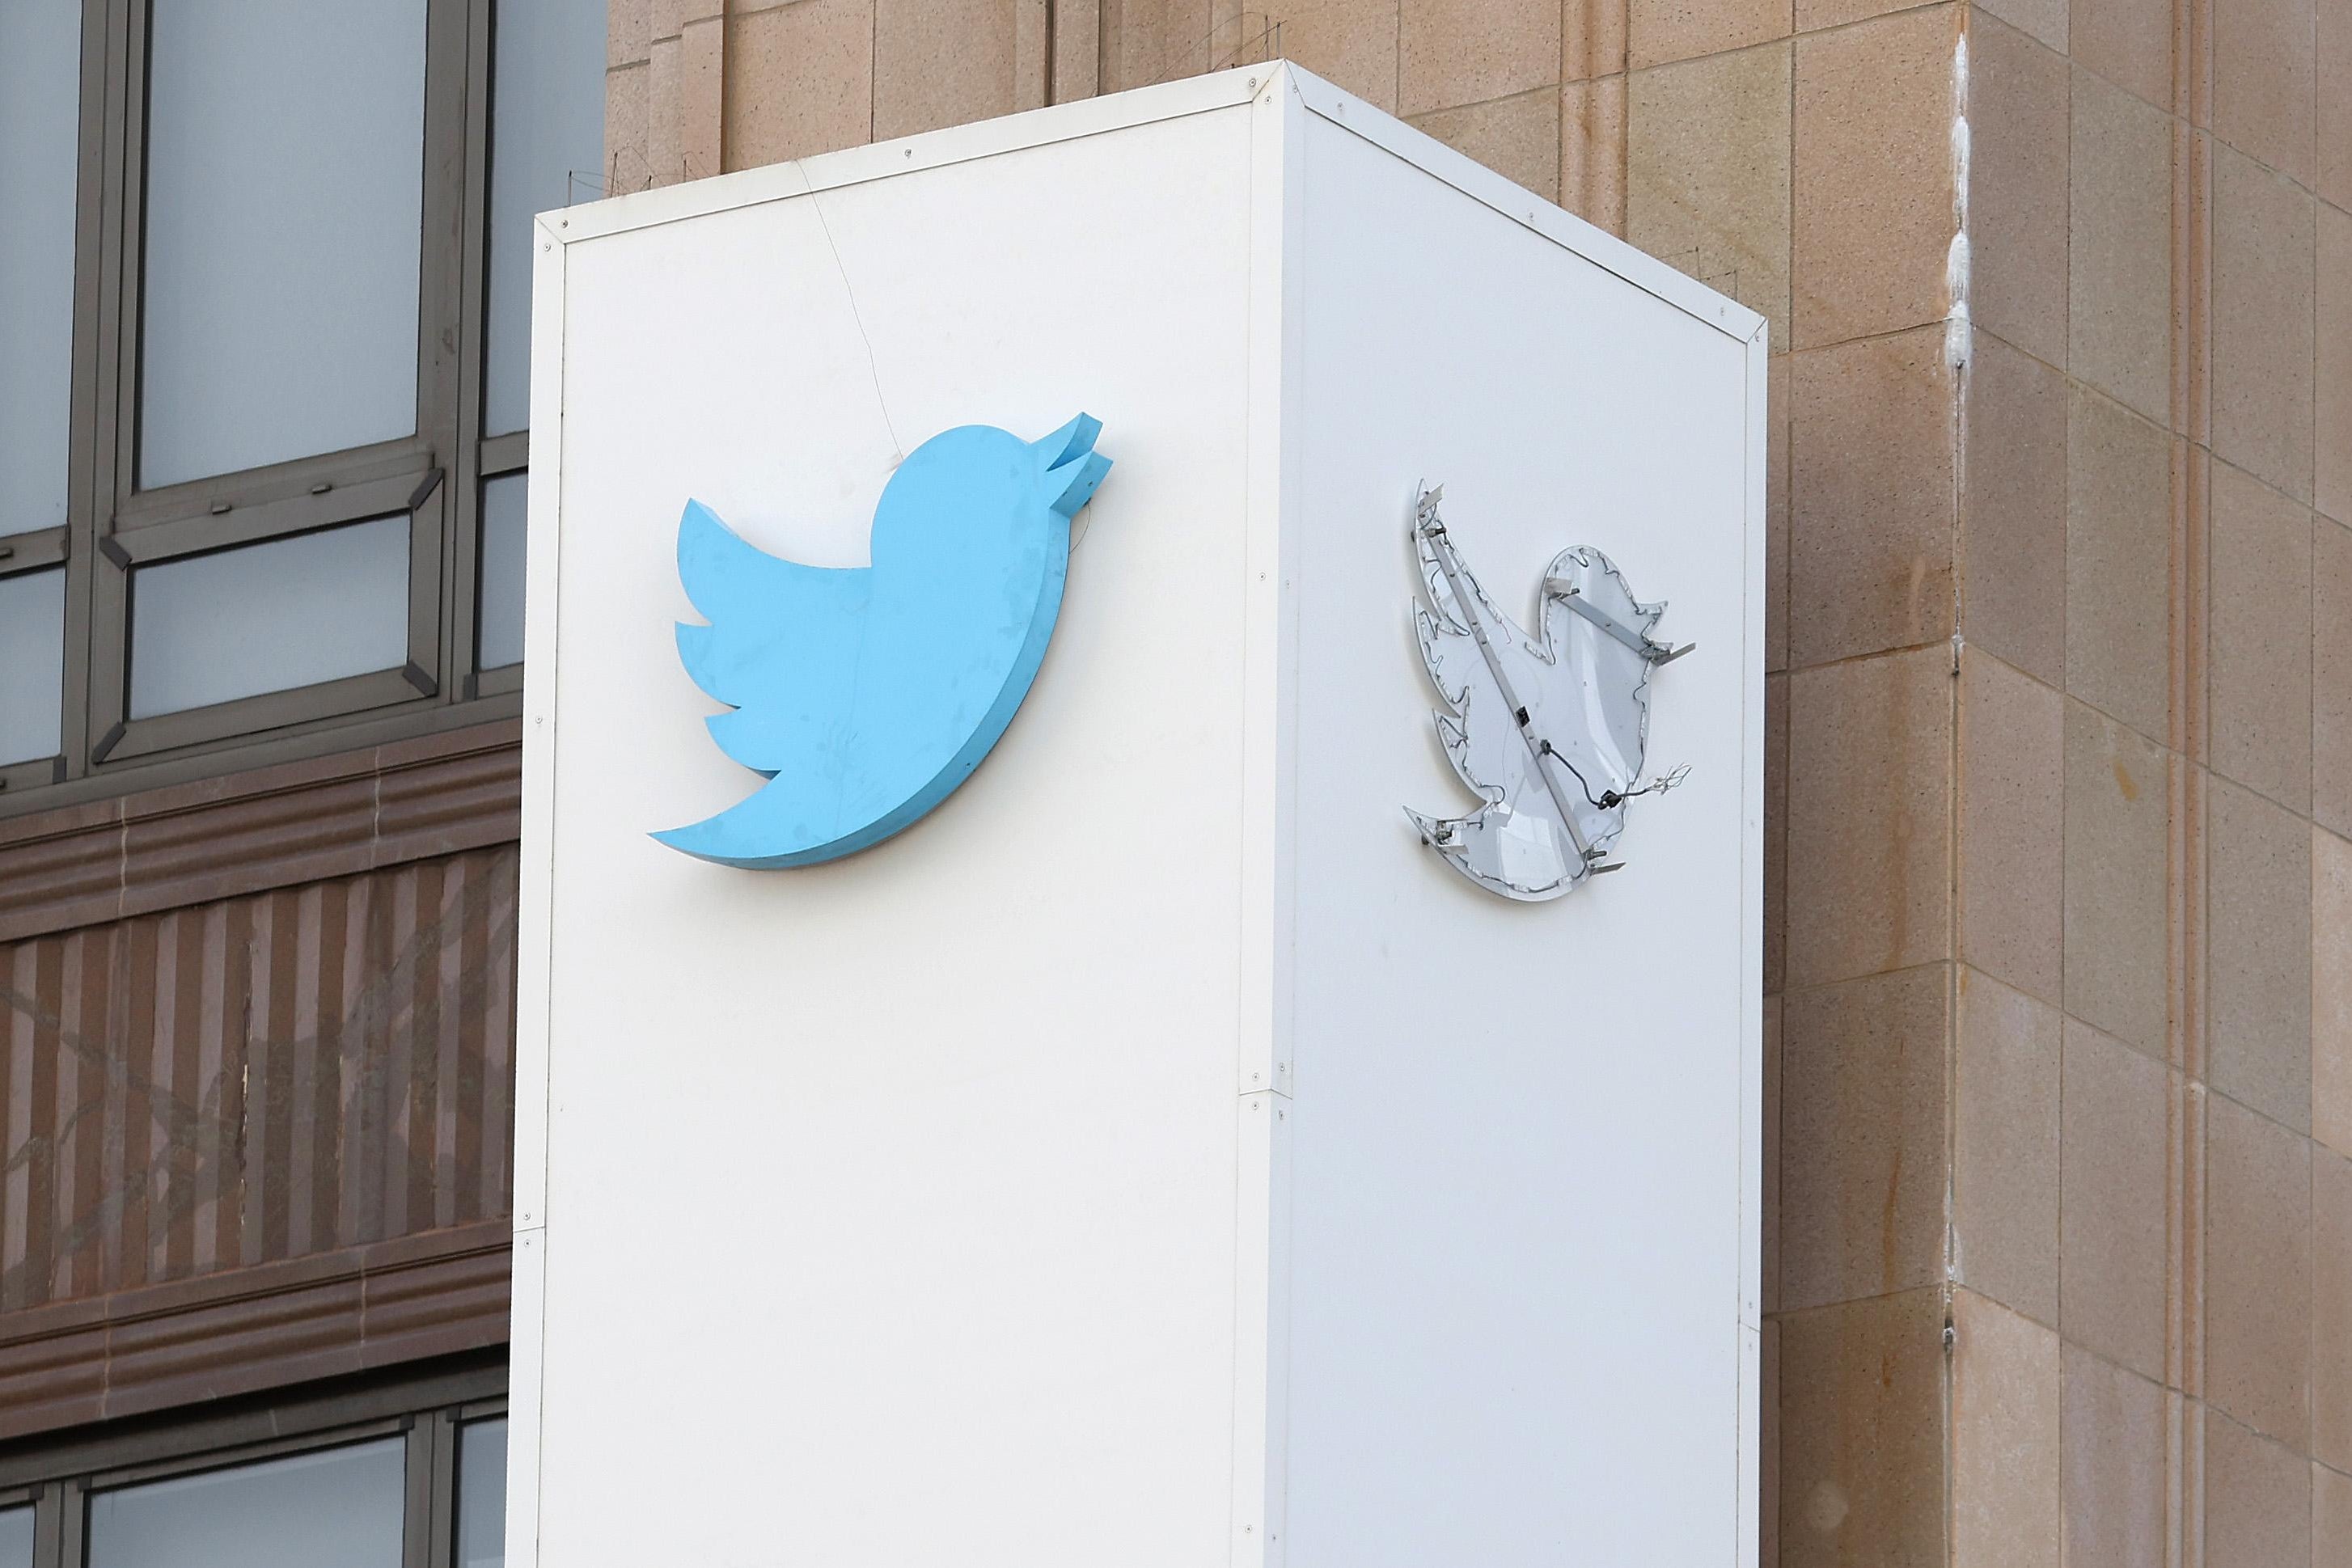 SAN FRANCISCO, CALIFORNIA - JULY 26: The outline of the iconic blue Twitter bird logo is visible on a sign in front of X headquarters on July 26, 2023 in San Francisco, California. A day after San Francisco police officers halted the dismantling of the Twitter sign at Twitter headquarters, one of the blue birds has disappeared along with three of the letters. CEO Elon Musk officially rebranded Twitter as "X" and has changed its bird logo, the biggest change he has made since taking over the social media platform. (Photo by Justin Sullivan/Getty Images)